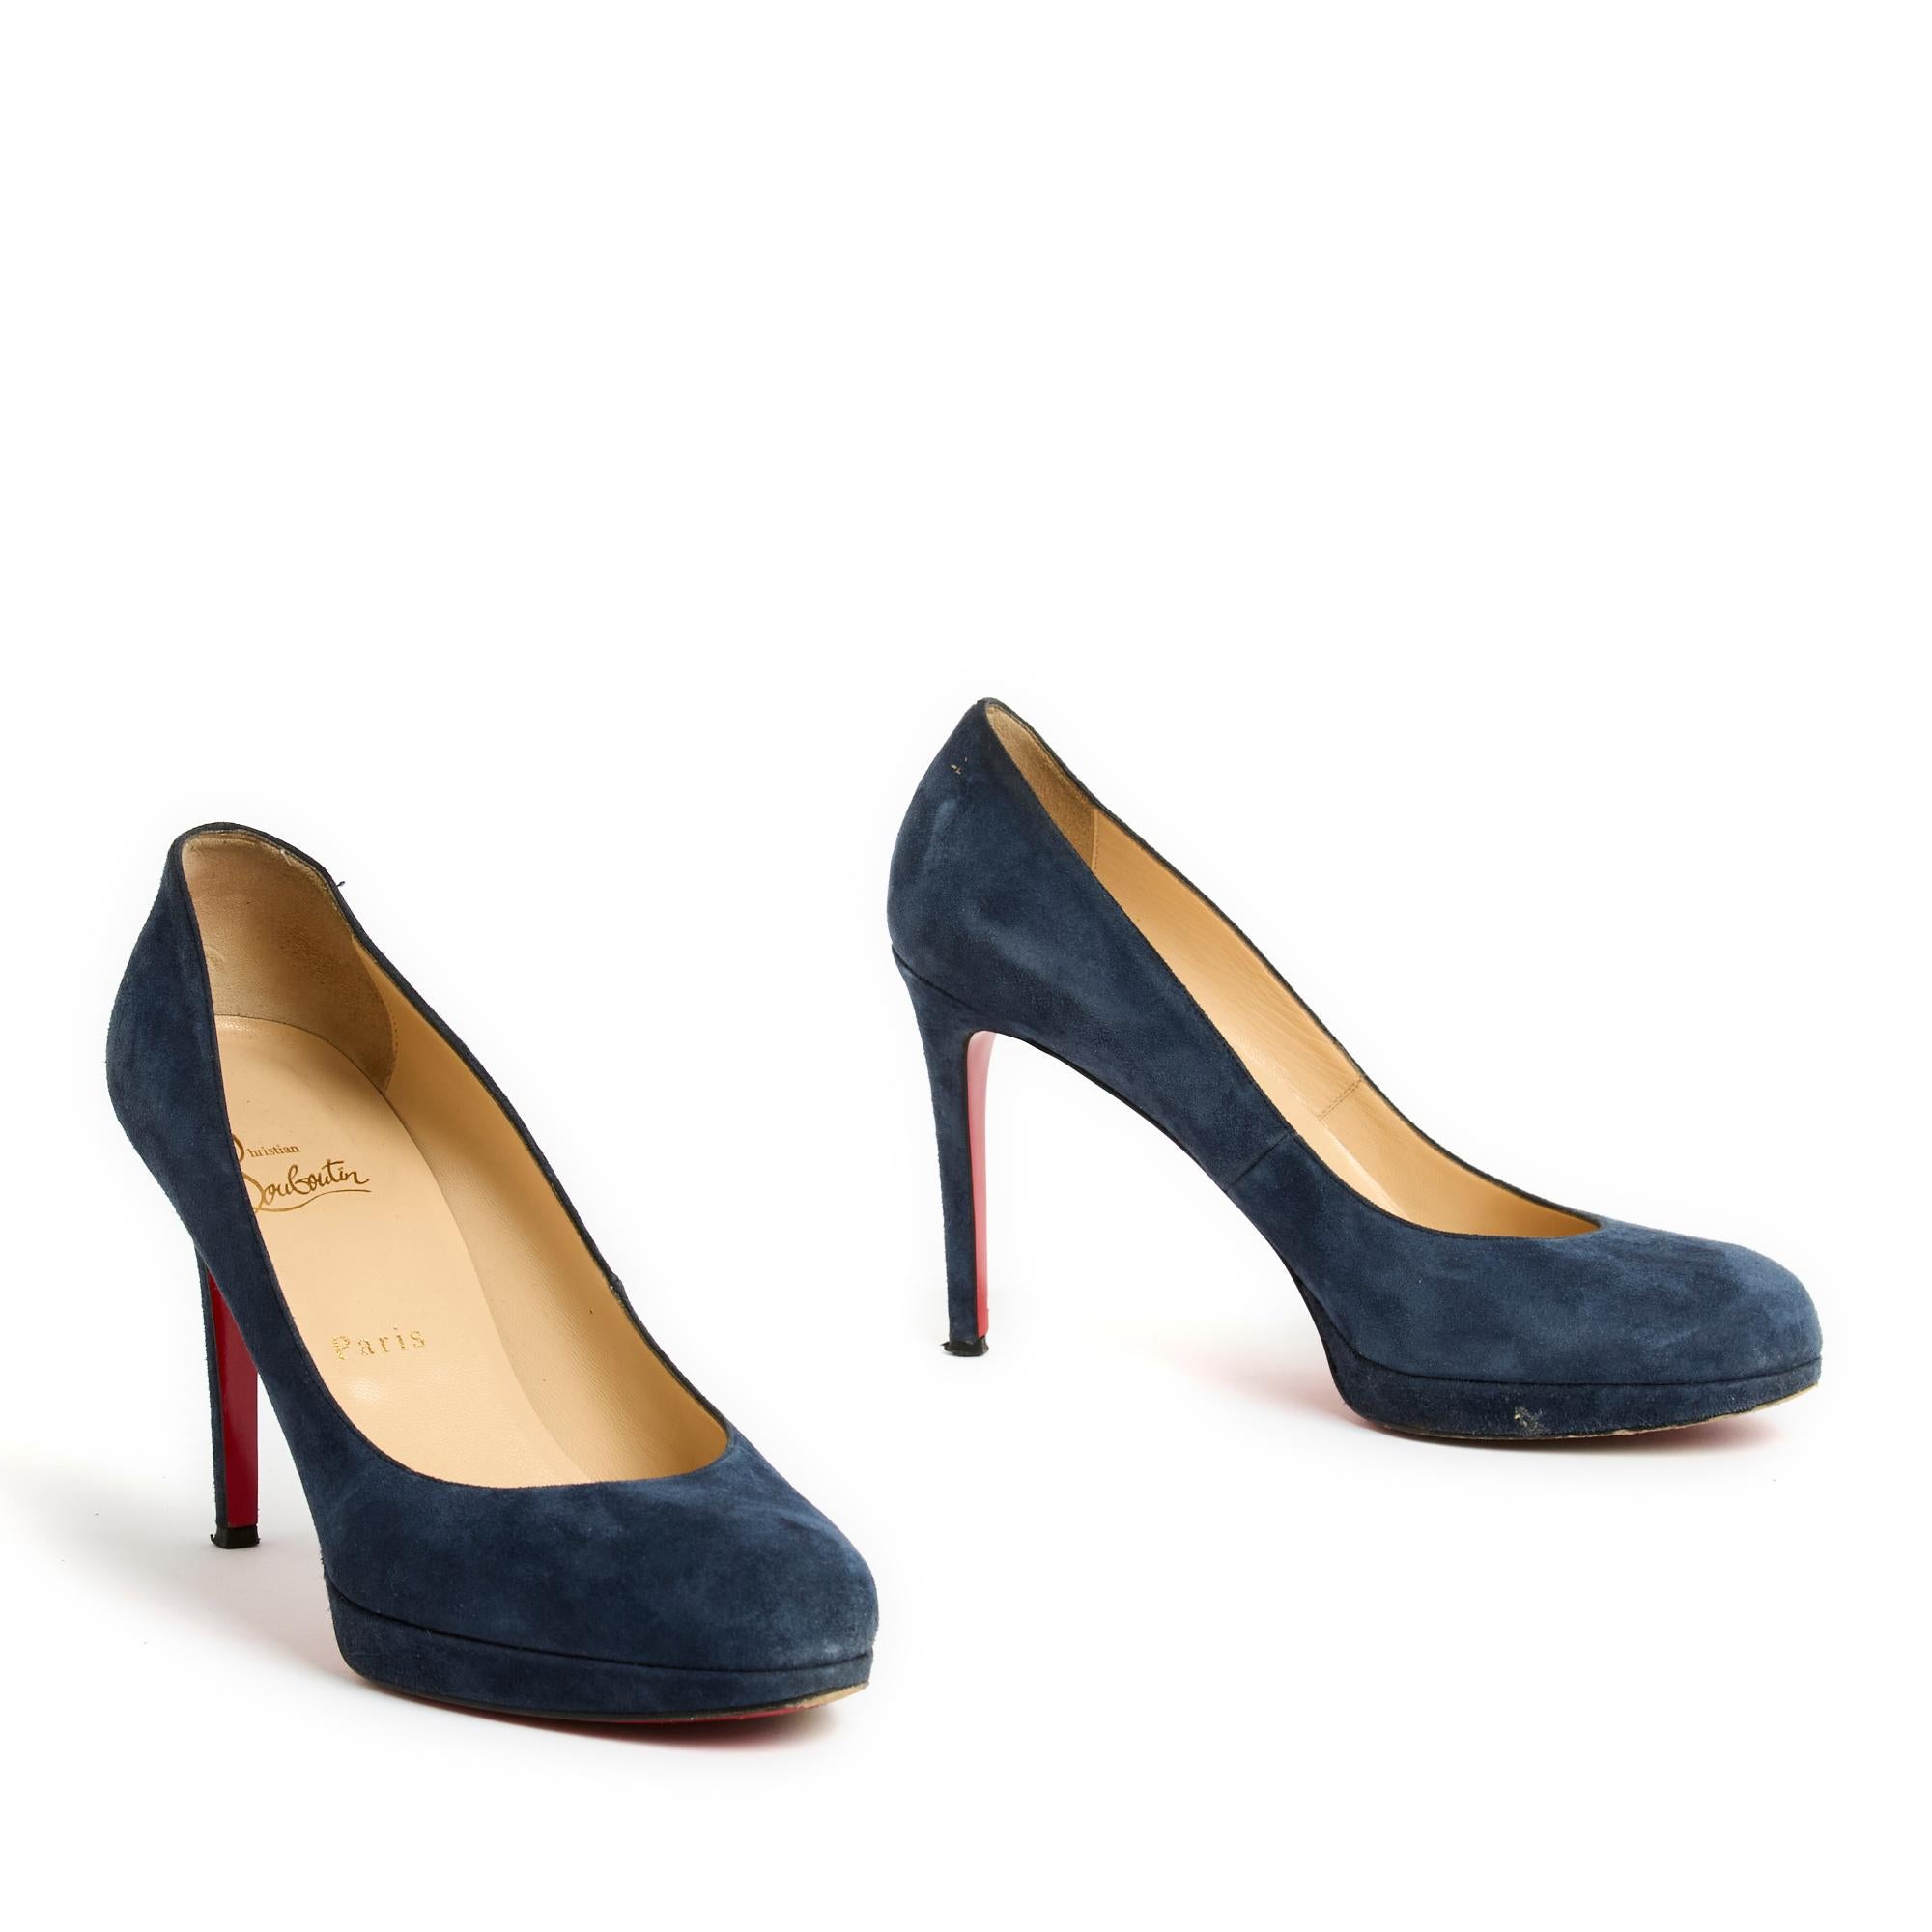 Christian Louboutin Fifi model pumps in blue suede, small platform in front. Size EU39, heel 10 cm, platform 1.5 cm, insole 25 cm. The pumps are in very good condition, perfect with baggy jeans and a pretty white t-shirt...